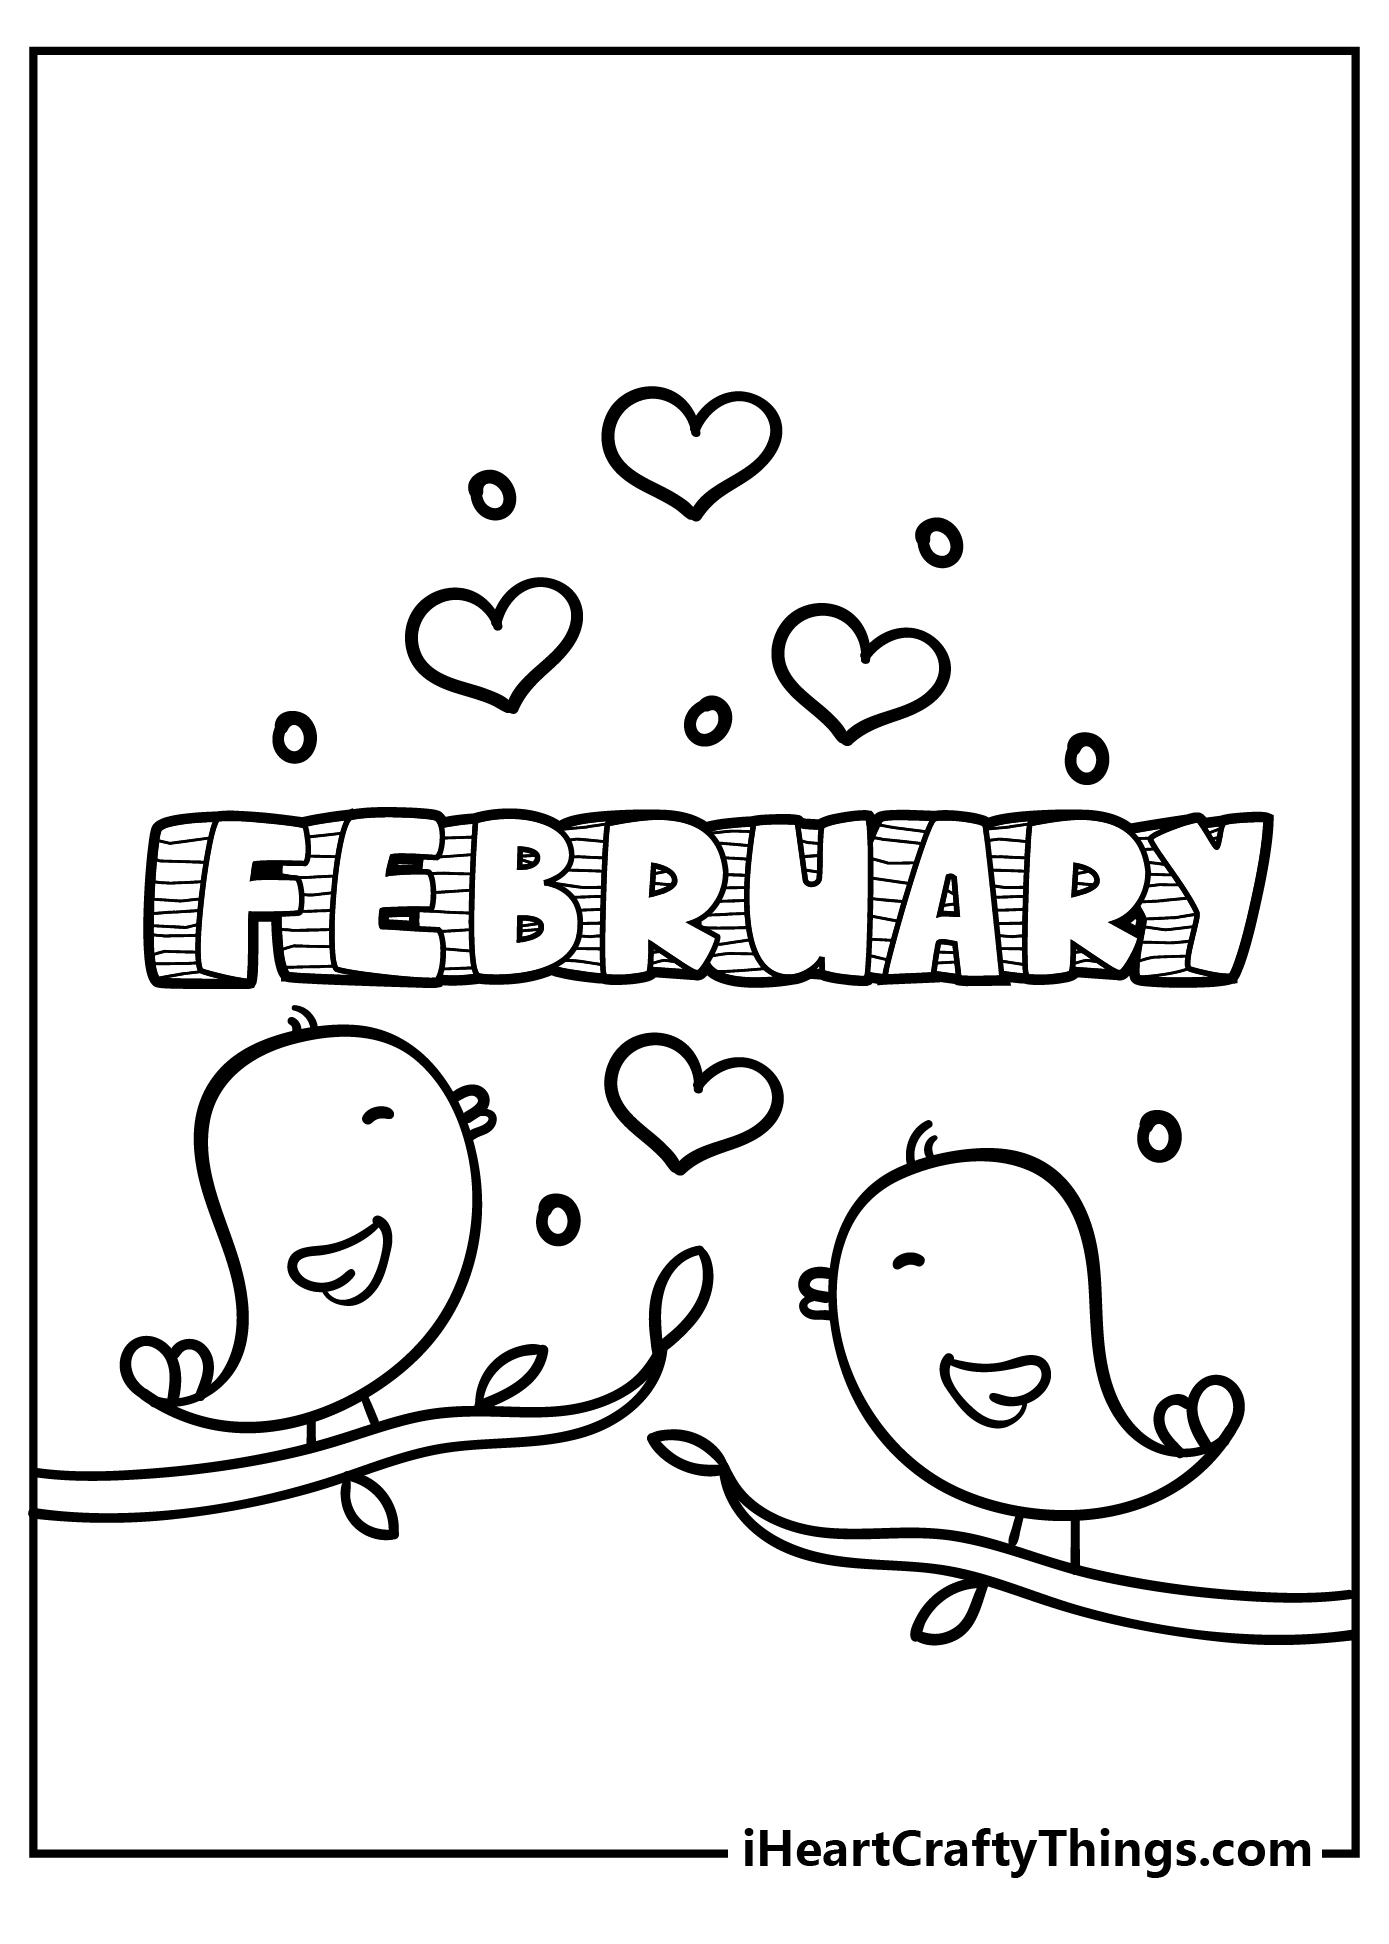 February Easy Coloring Pages